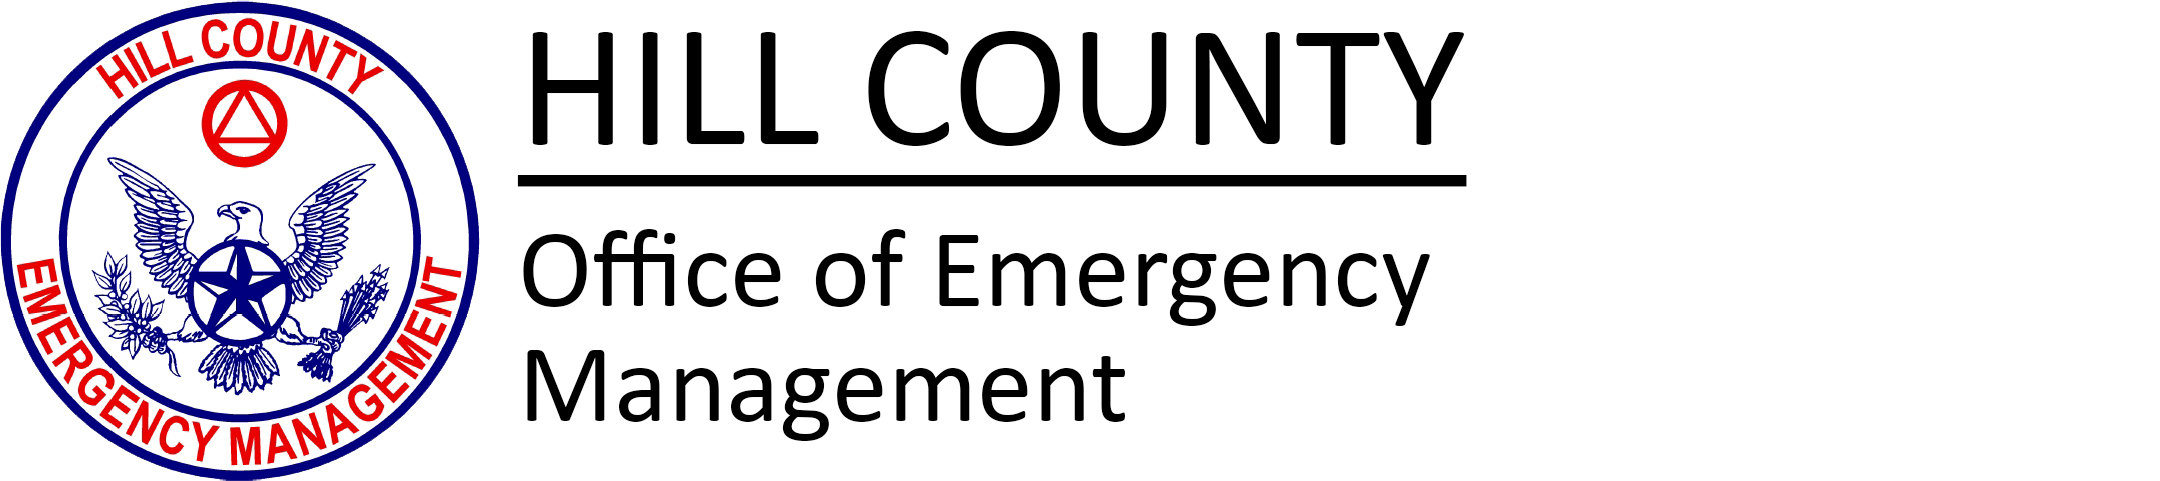 Hill County Emergency Management